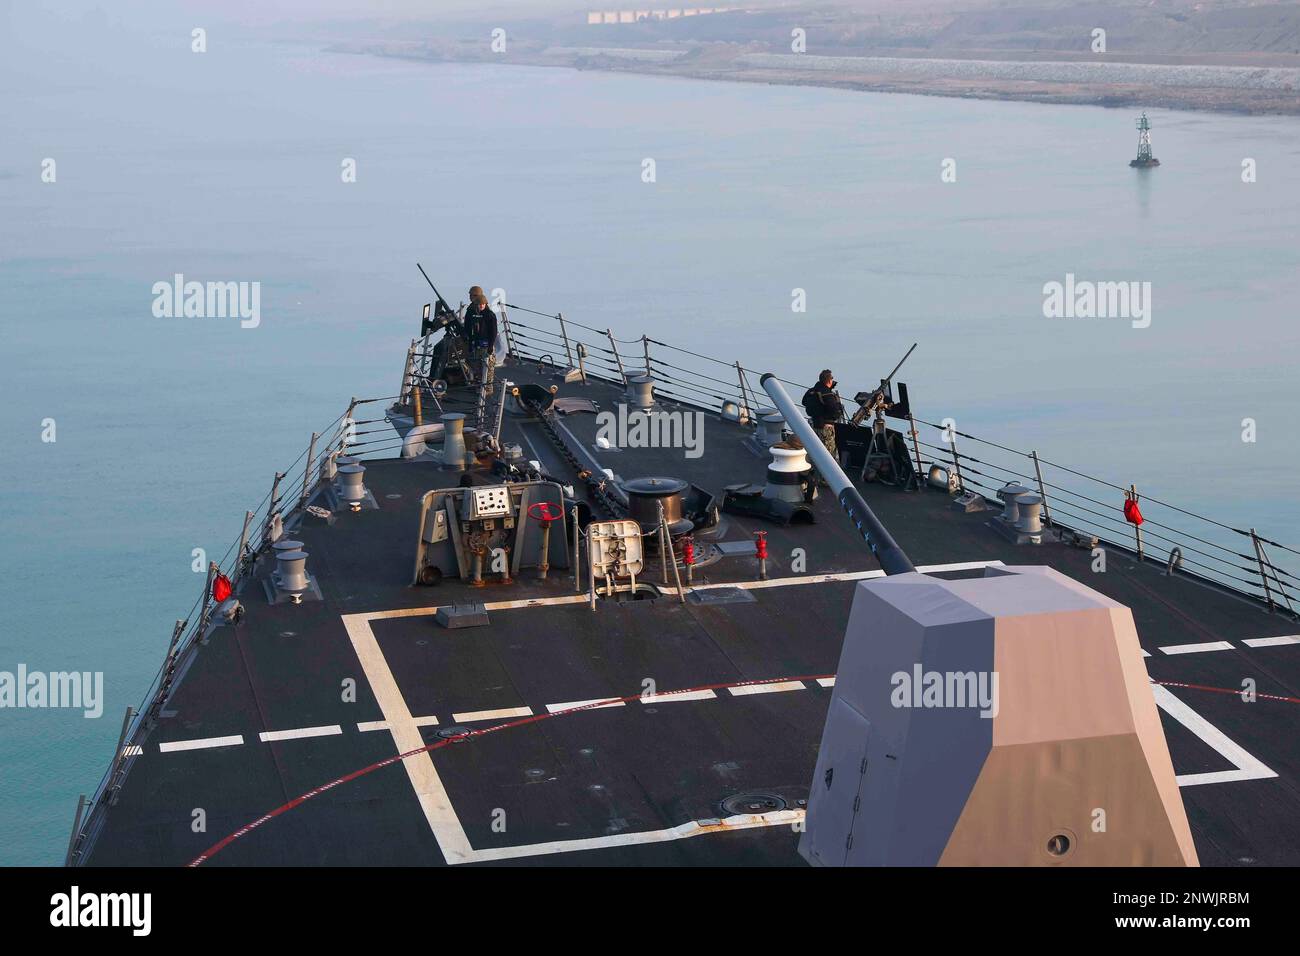 230121-N-JO162-1027 SUEZ CANAL (Jan. 21, 2023) Sailors assigned to the guided-missile destroyer USS Truxtun (DDG 103) stand security force watch during a transit of the Suez Canal, Jan. 21, 2023. Truxtun is deployed to the U.S. 5th Fleet area of operations to help ensure maritime security and stability in the Middle East region. Stock Photo